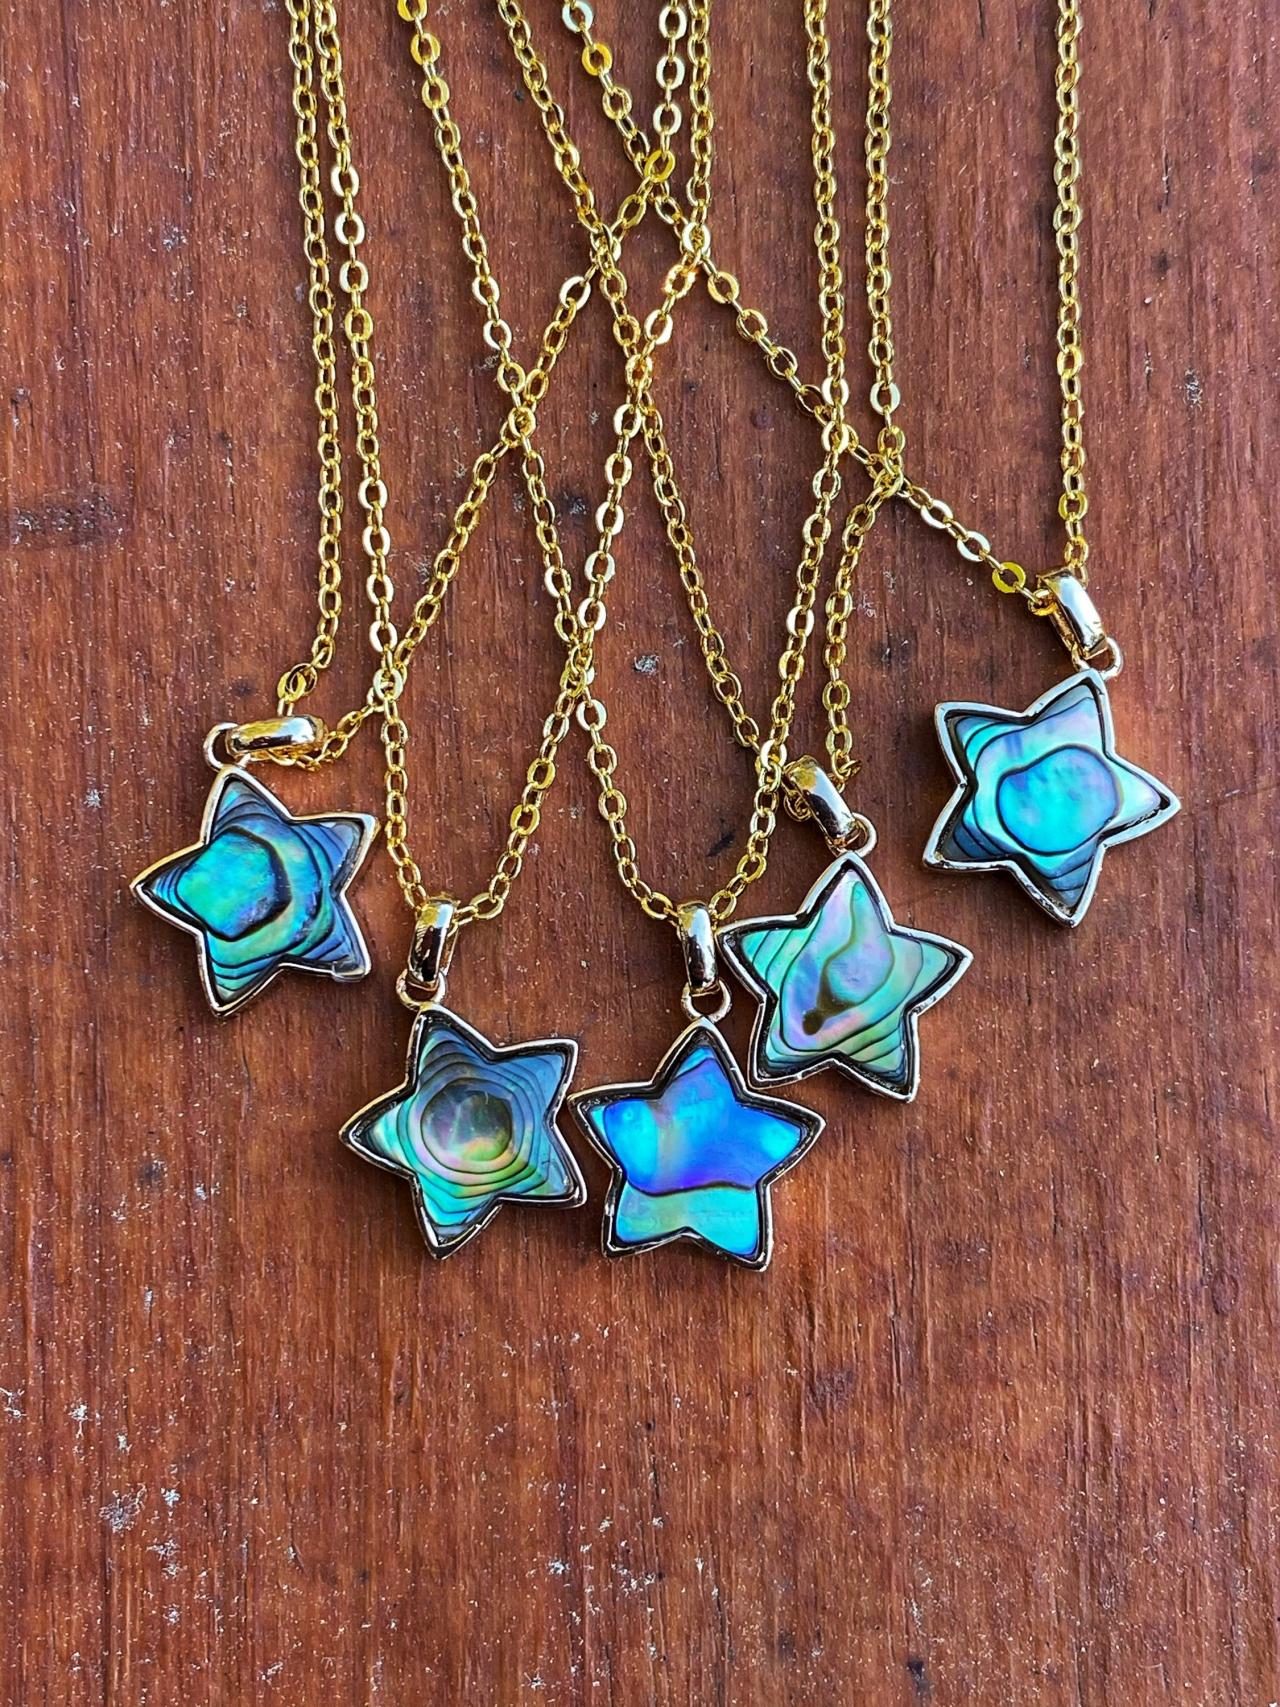 Abalone Shell Star Necklace - Abalone Necklace - Natural Abalone Necklace - Abalone Star Necklace - Star Necklace - Natural Star Necklace